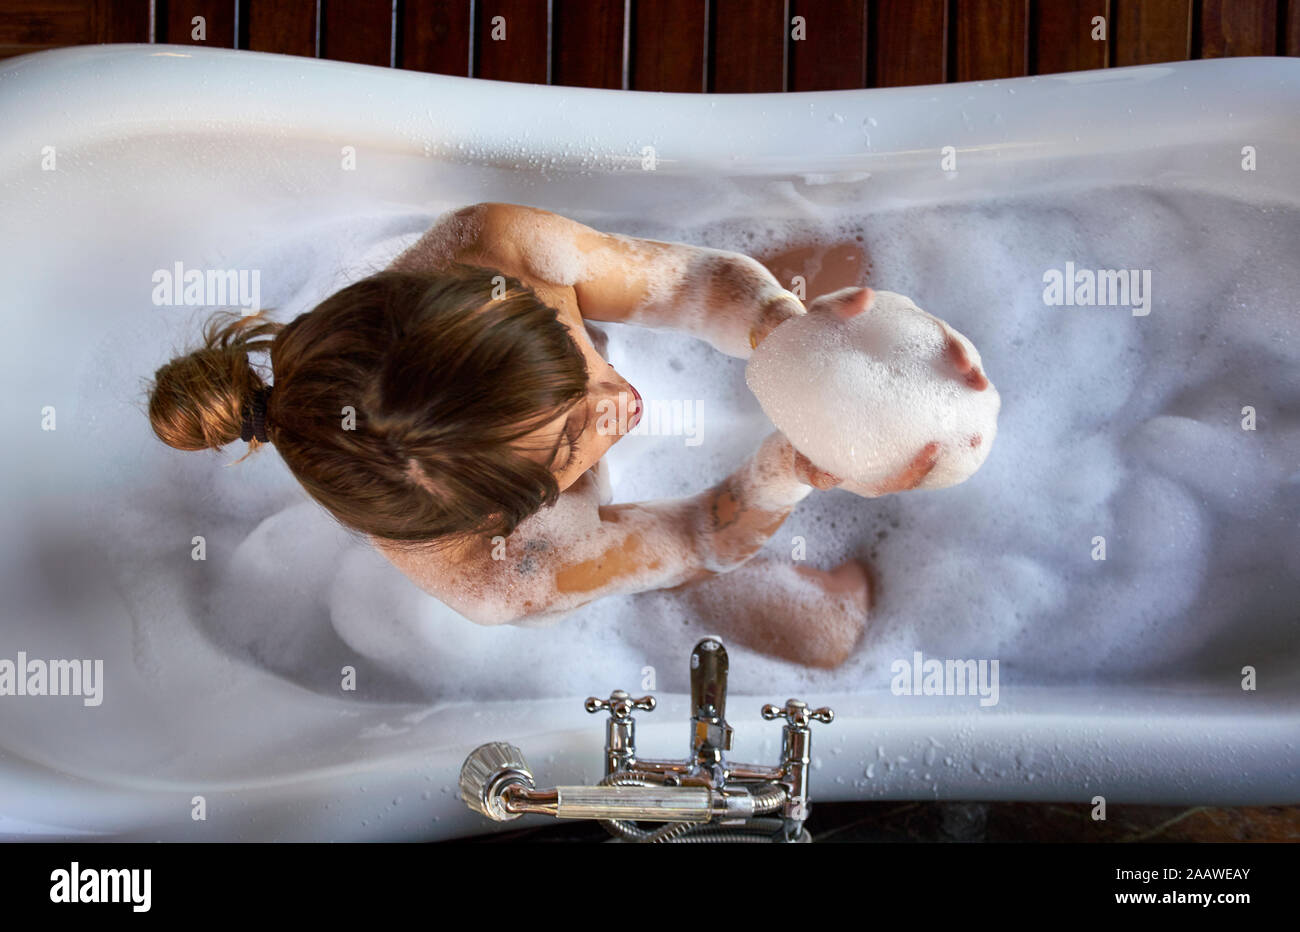 Woman playing with the foam in a bathtub, from above Stock Photo